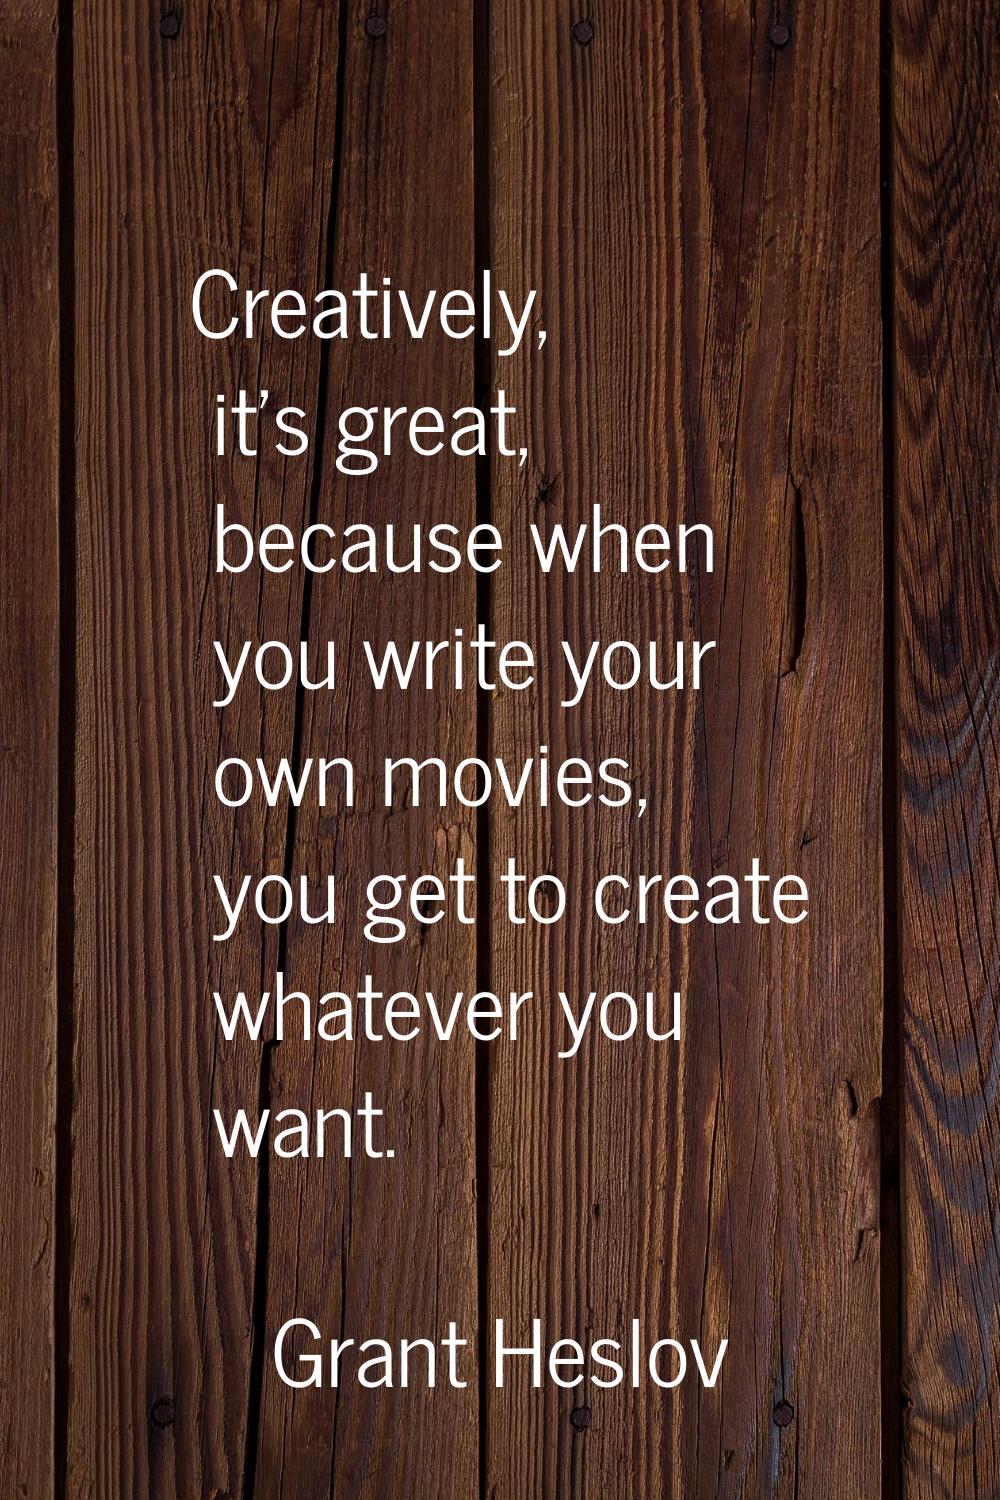 Creatively, it's great, because when you write your own movies, you get to create whatever you want